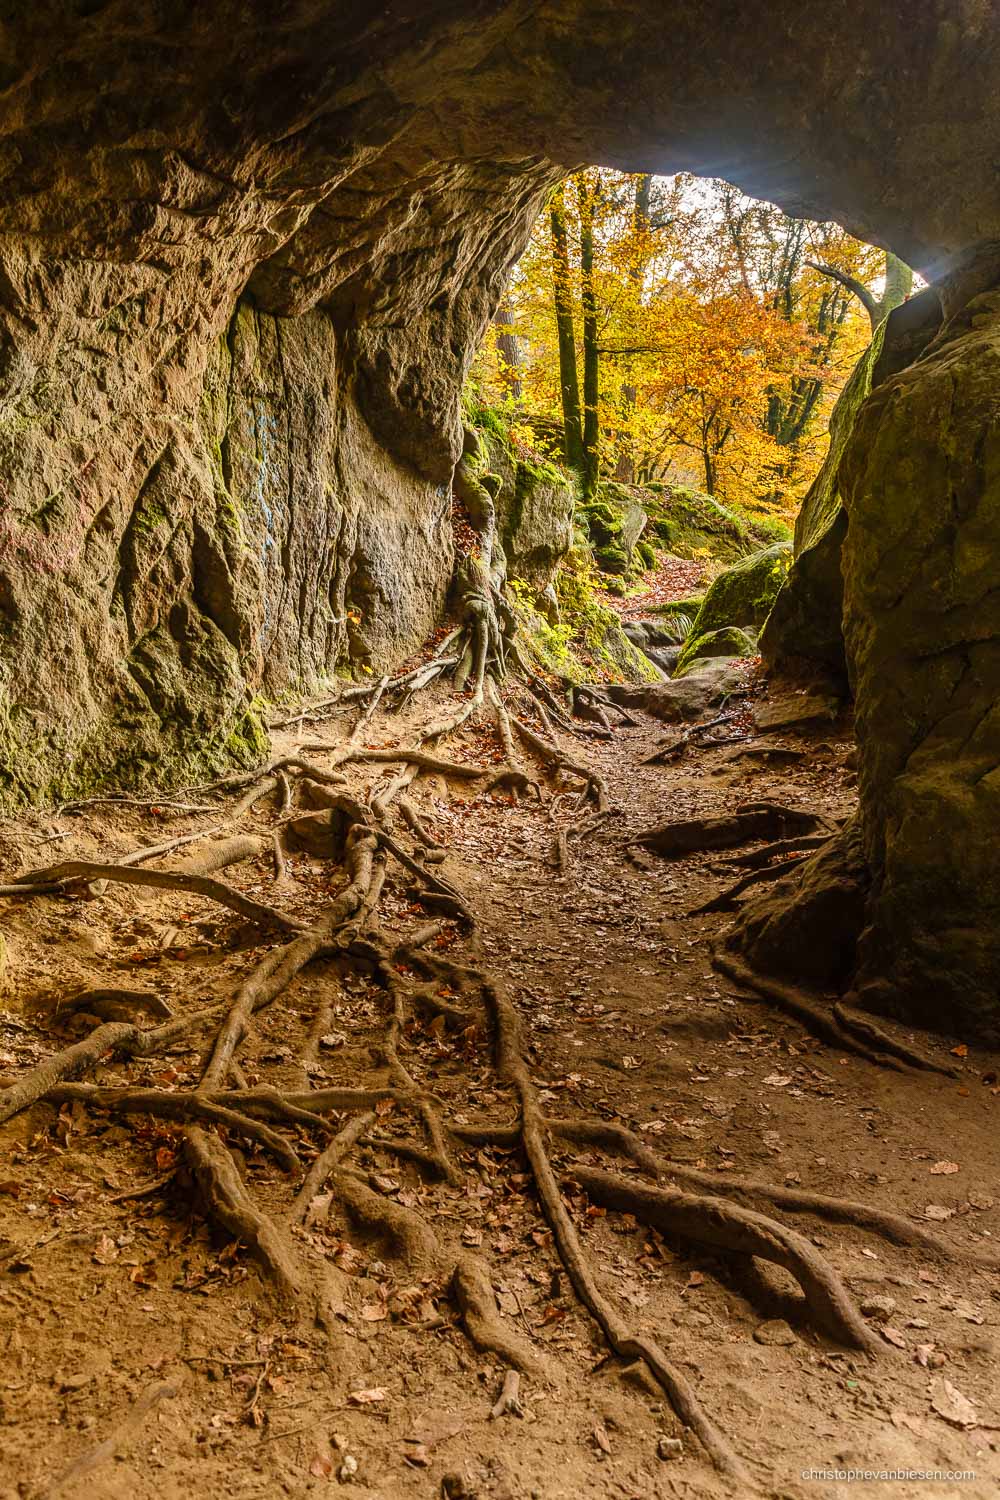 Visit the Mullerthal - Luxembourg - Autumn in Luxembourg's forests in the Mullerthal region near Berdorf - Deep Roots